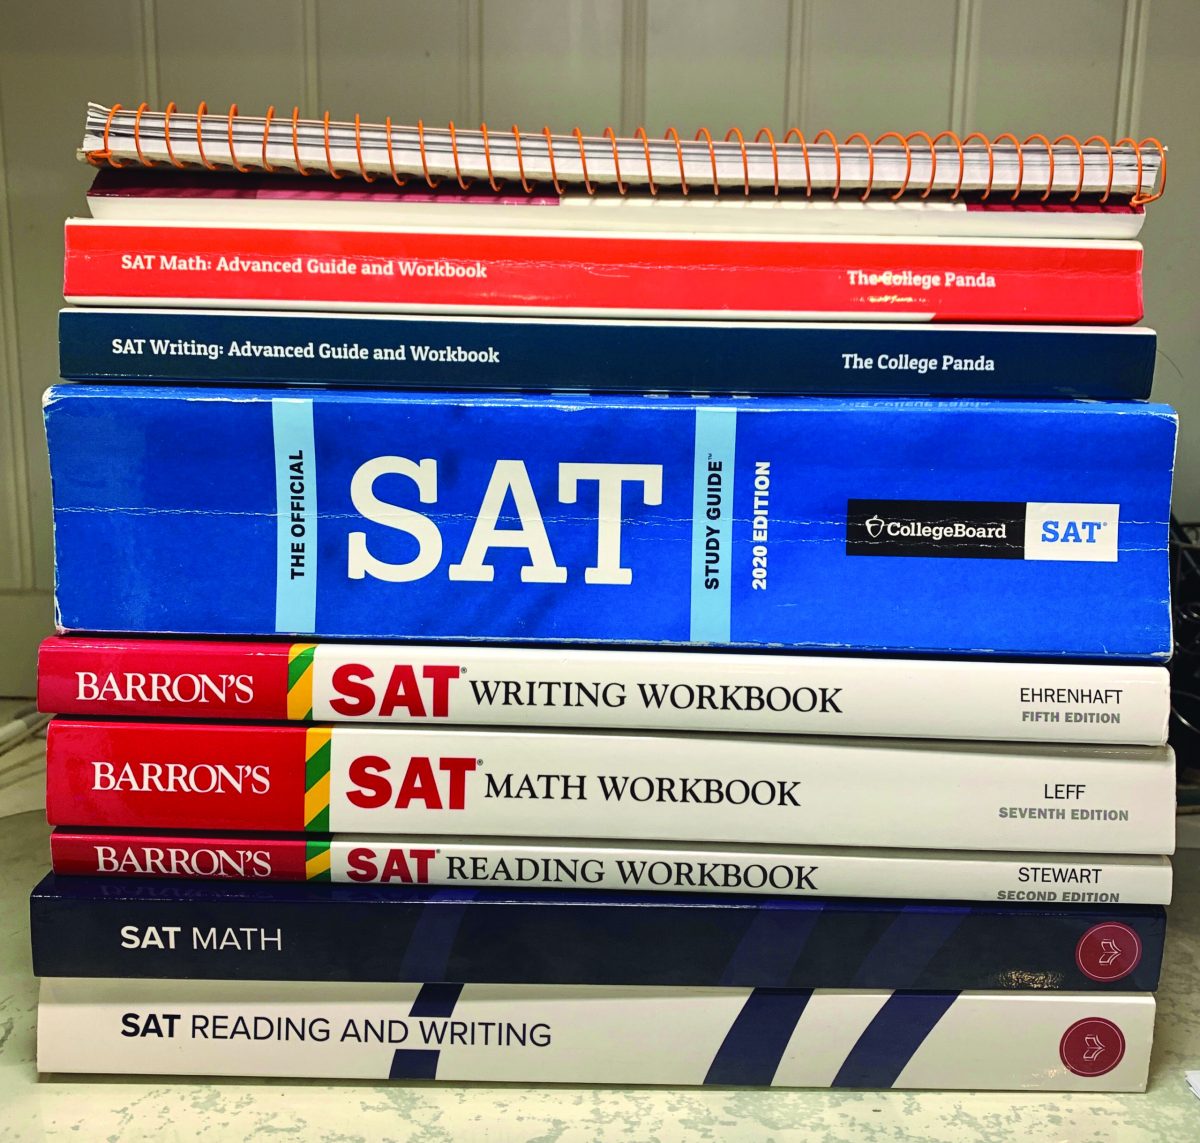 The College Board makes new SAT Changes